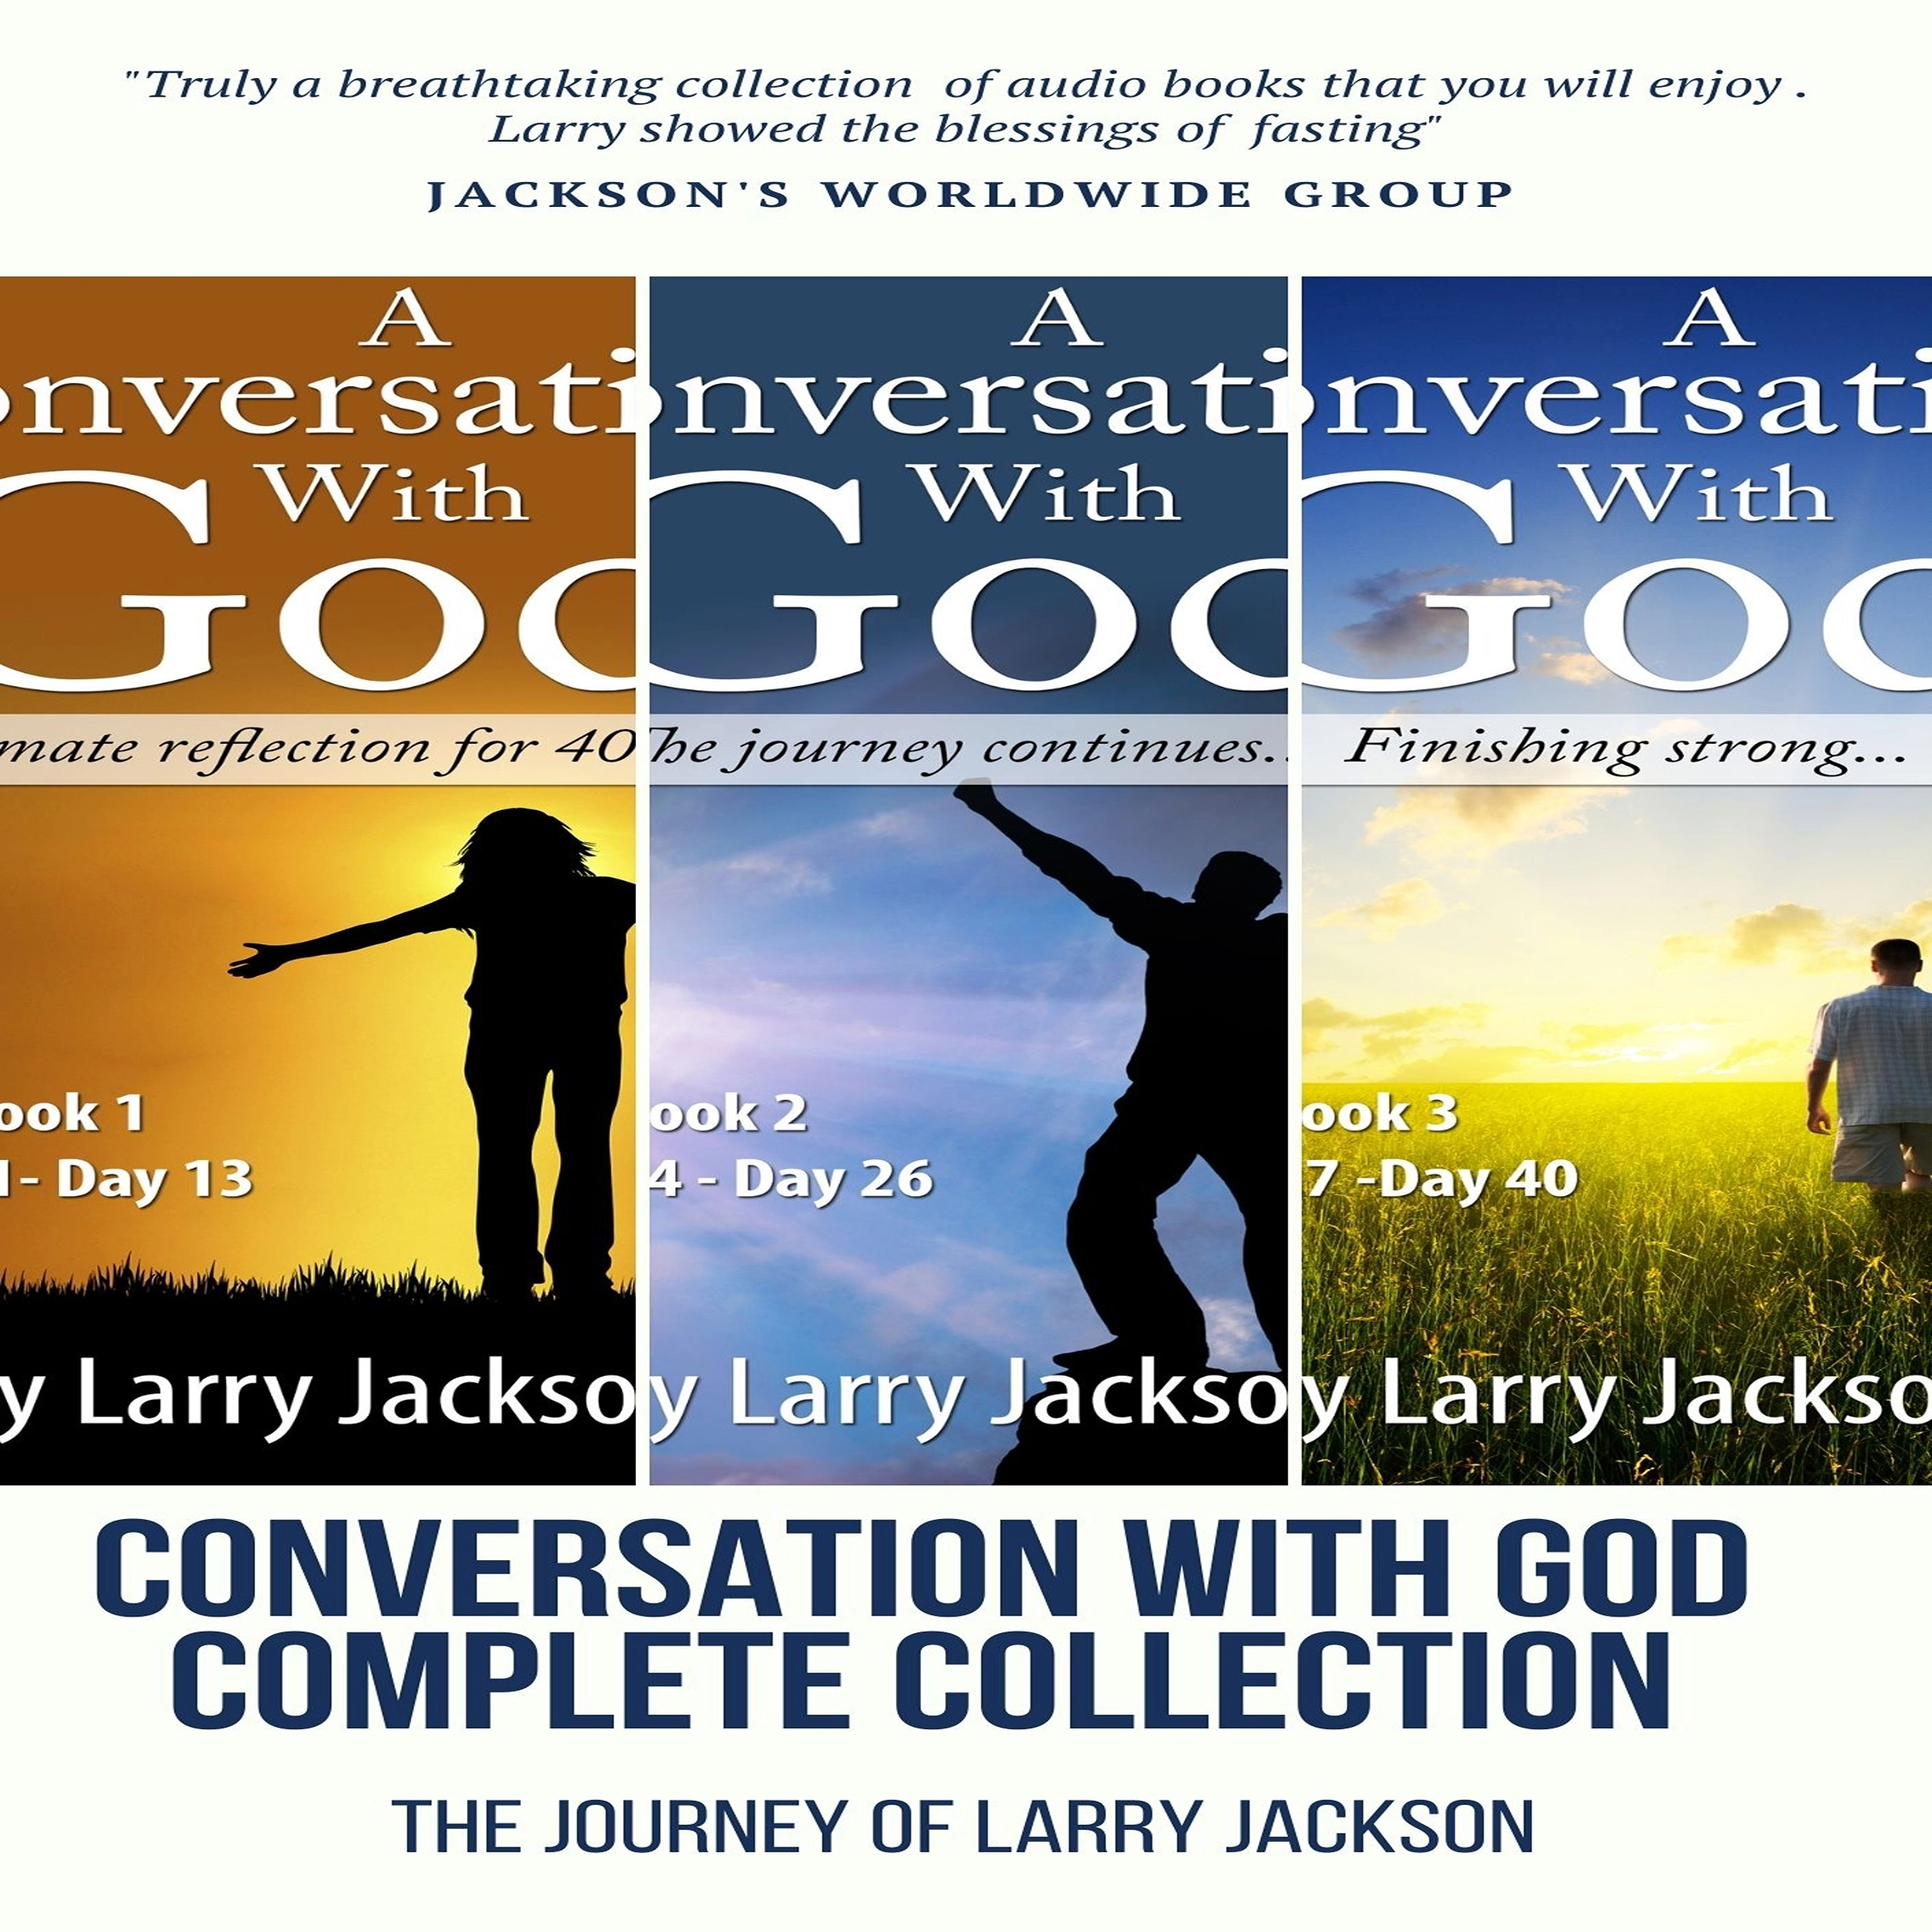 A Conversatio With God - The Entire Collection by Larry Jackson Audiobook